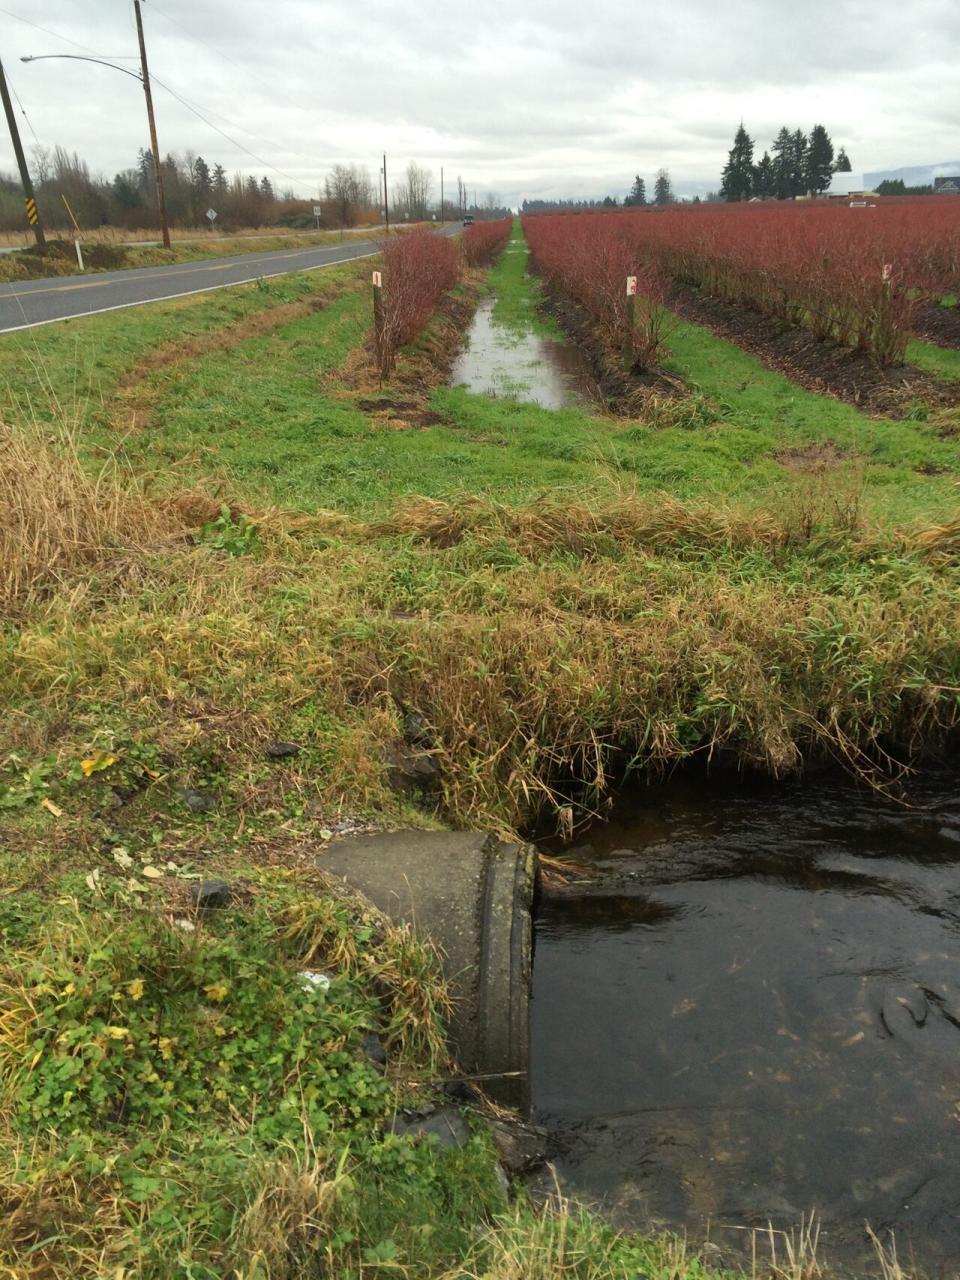 Pictured is one of the sampling sites at Pepin Creek, located in WA near the Canadian border. 